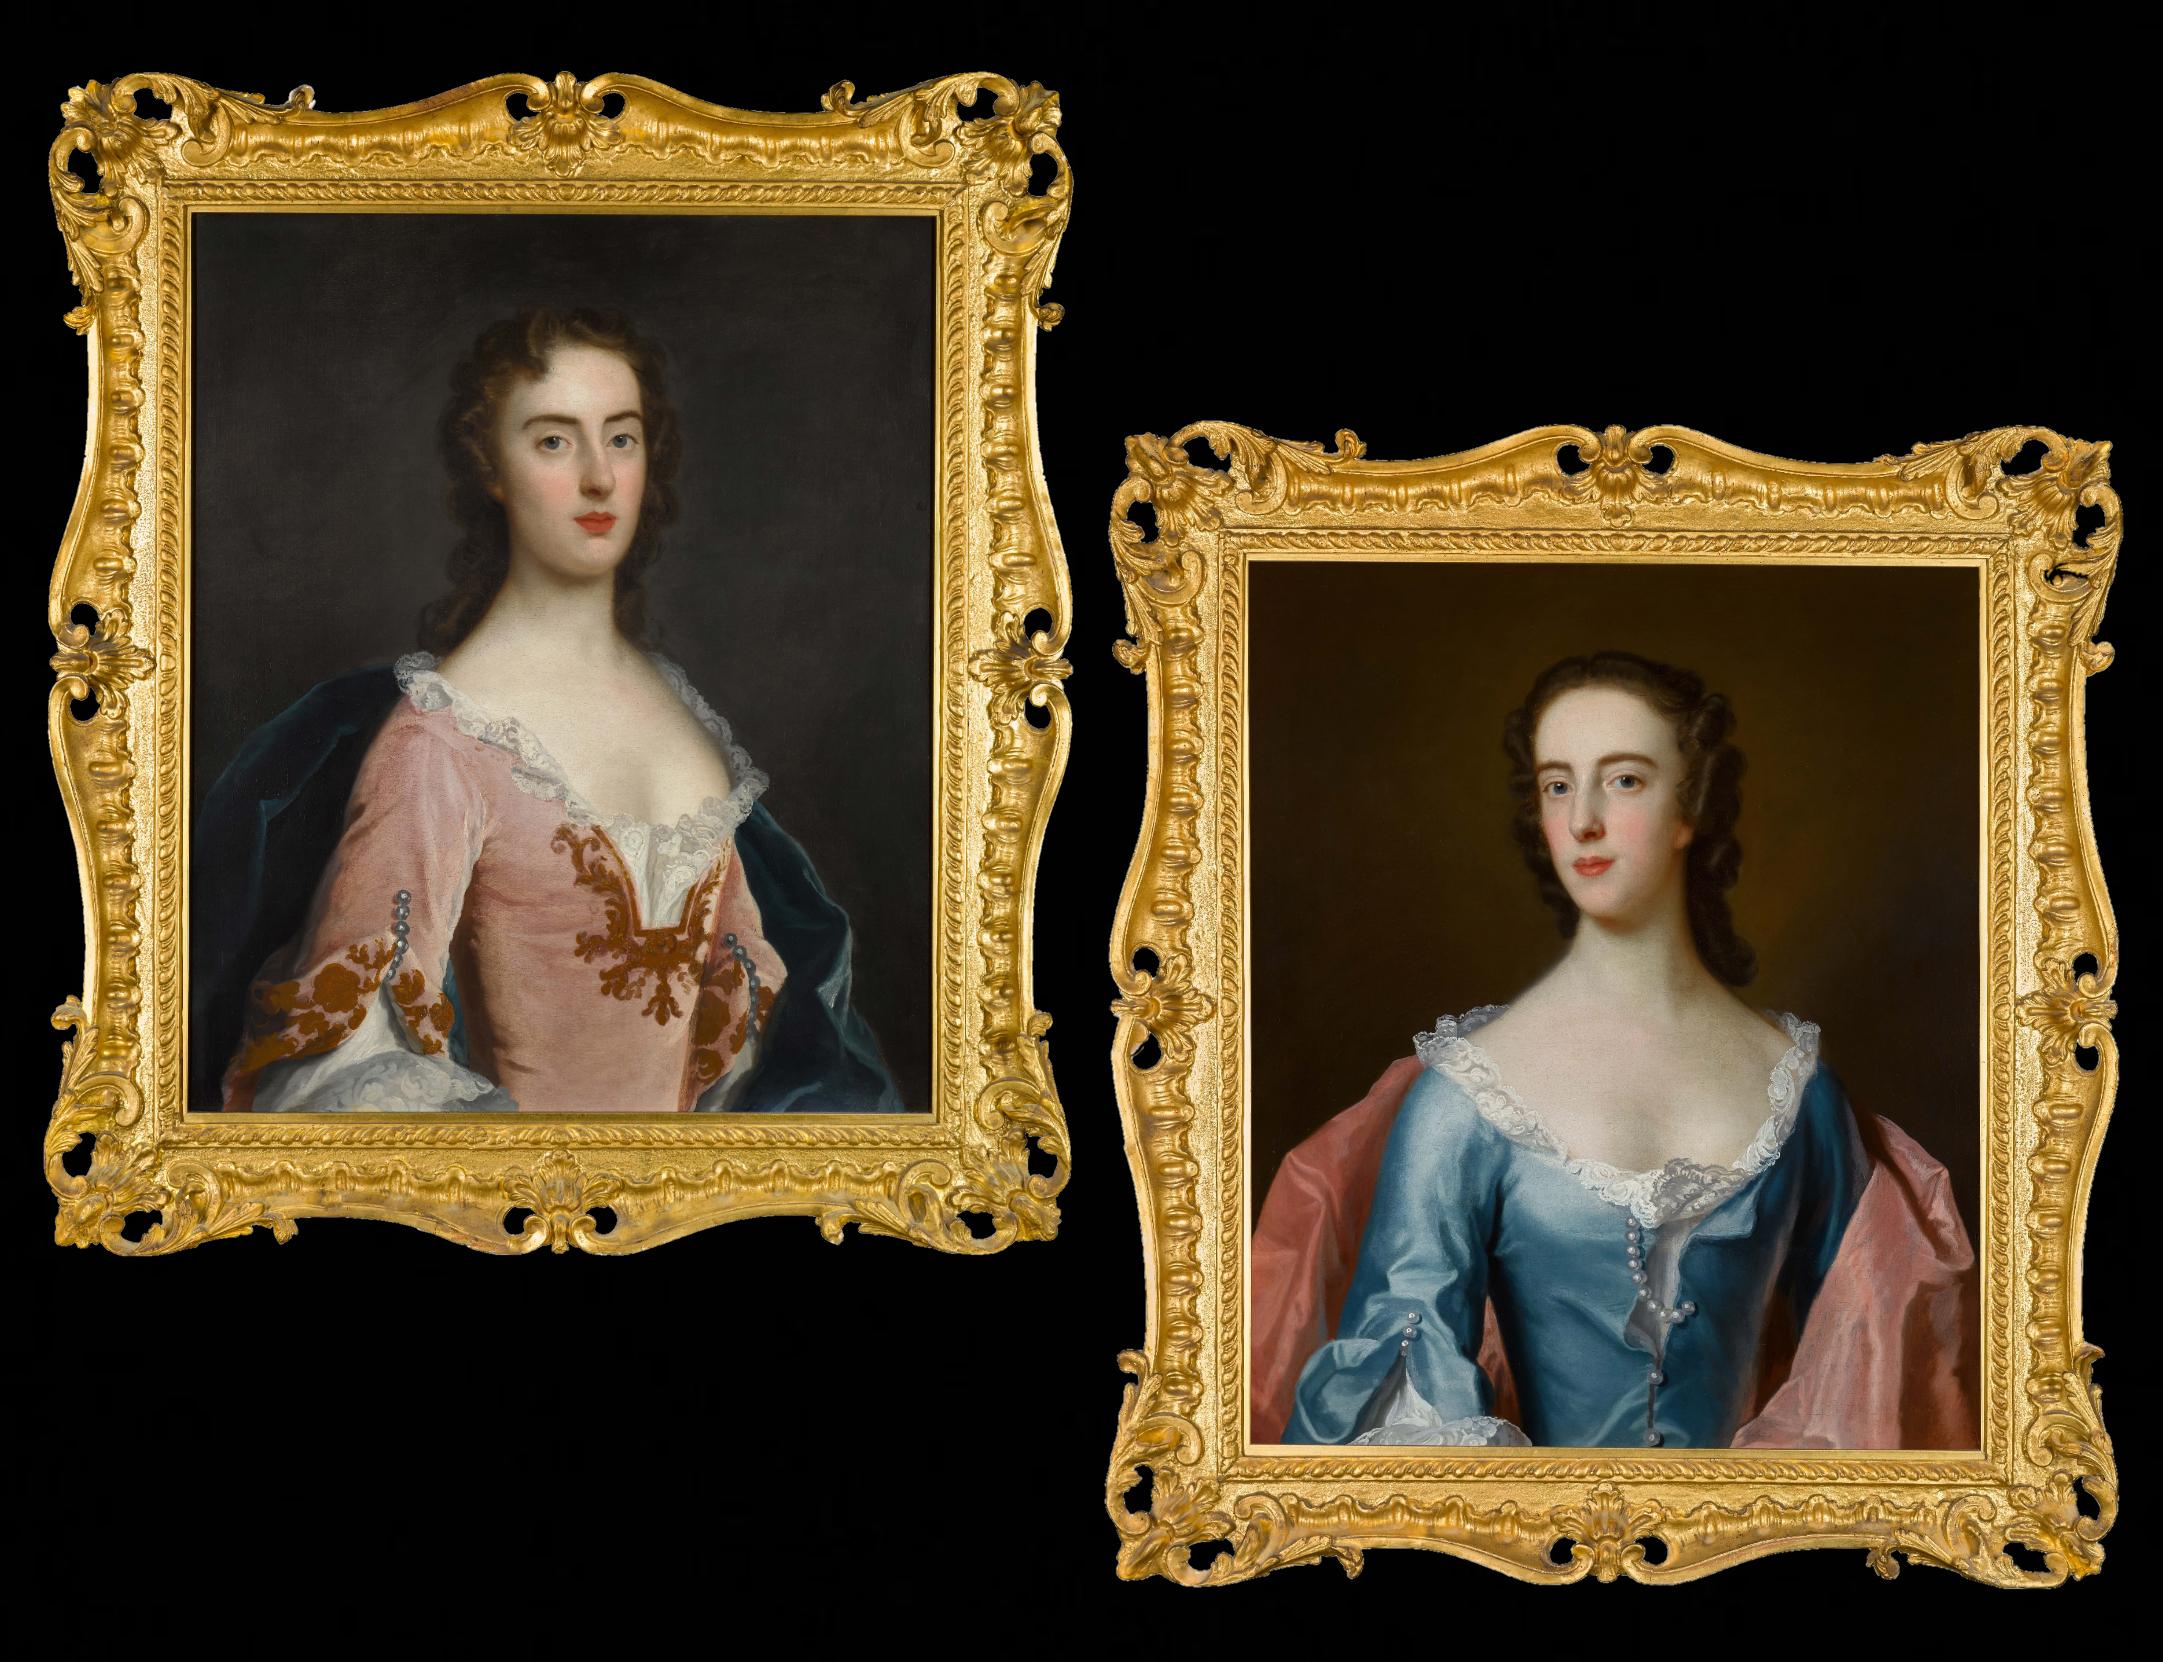 English Portraits of Lady, Dorothy & Jane Wood c.1750, Remarkable Carved Frames - Art by John Theodore Heins